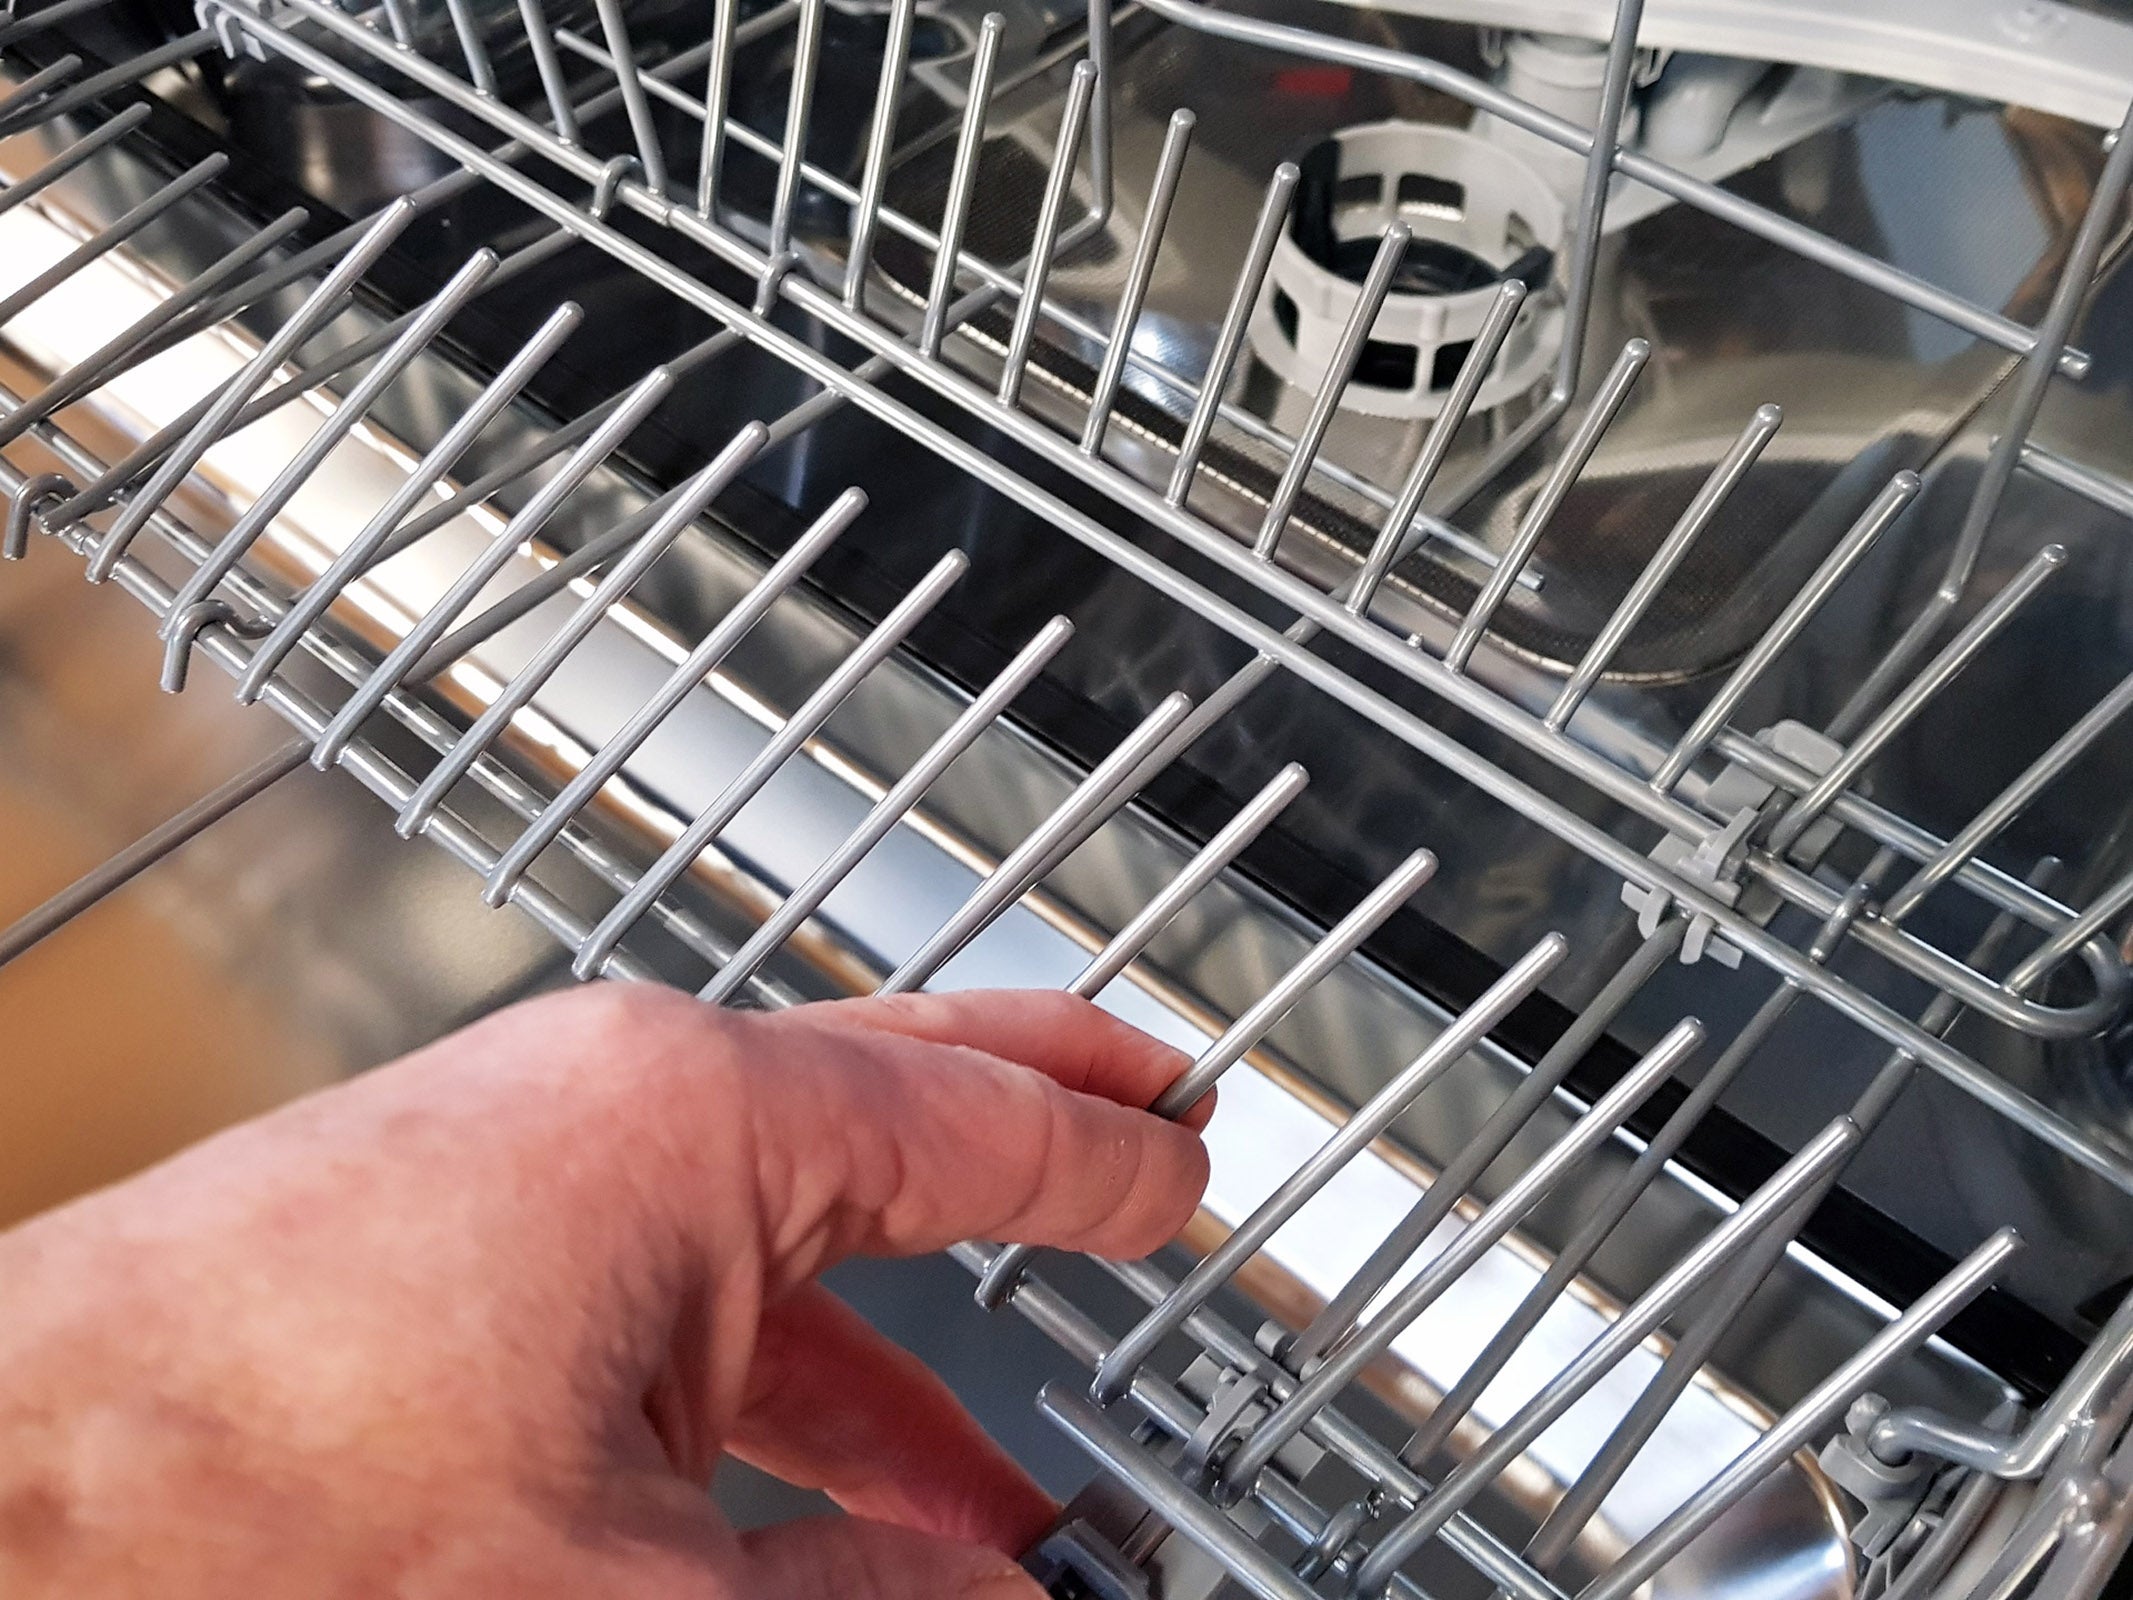 Hand examining the upper rack of an Indesit dishwasher.